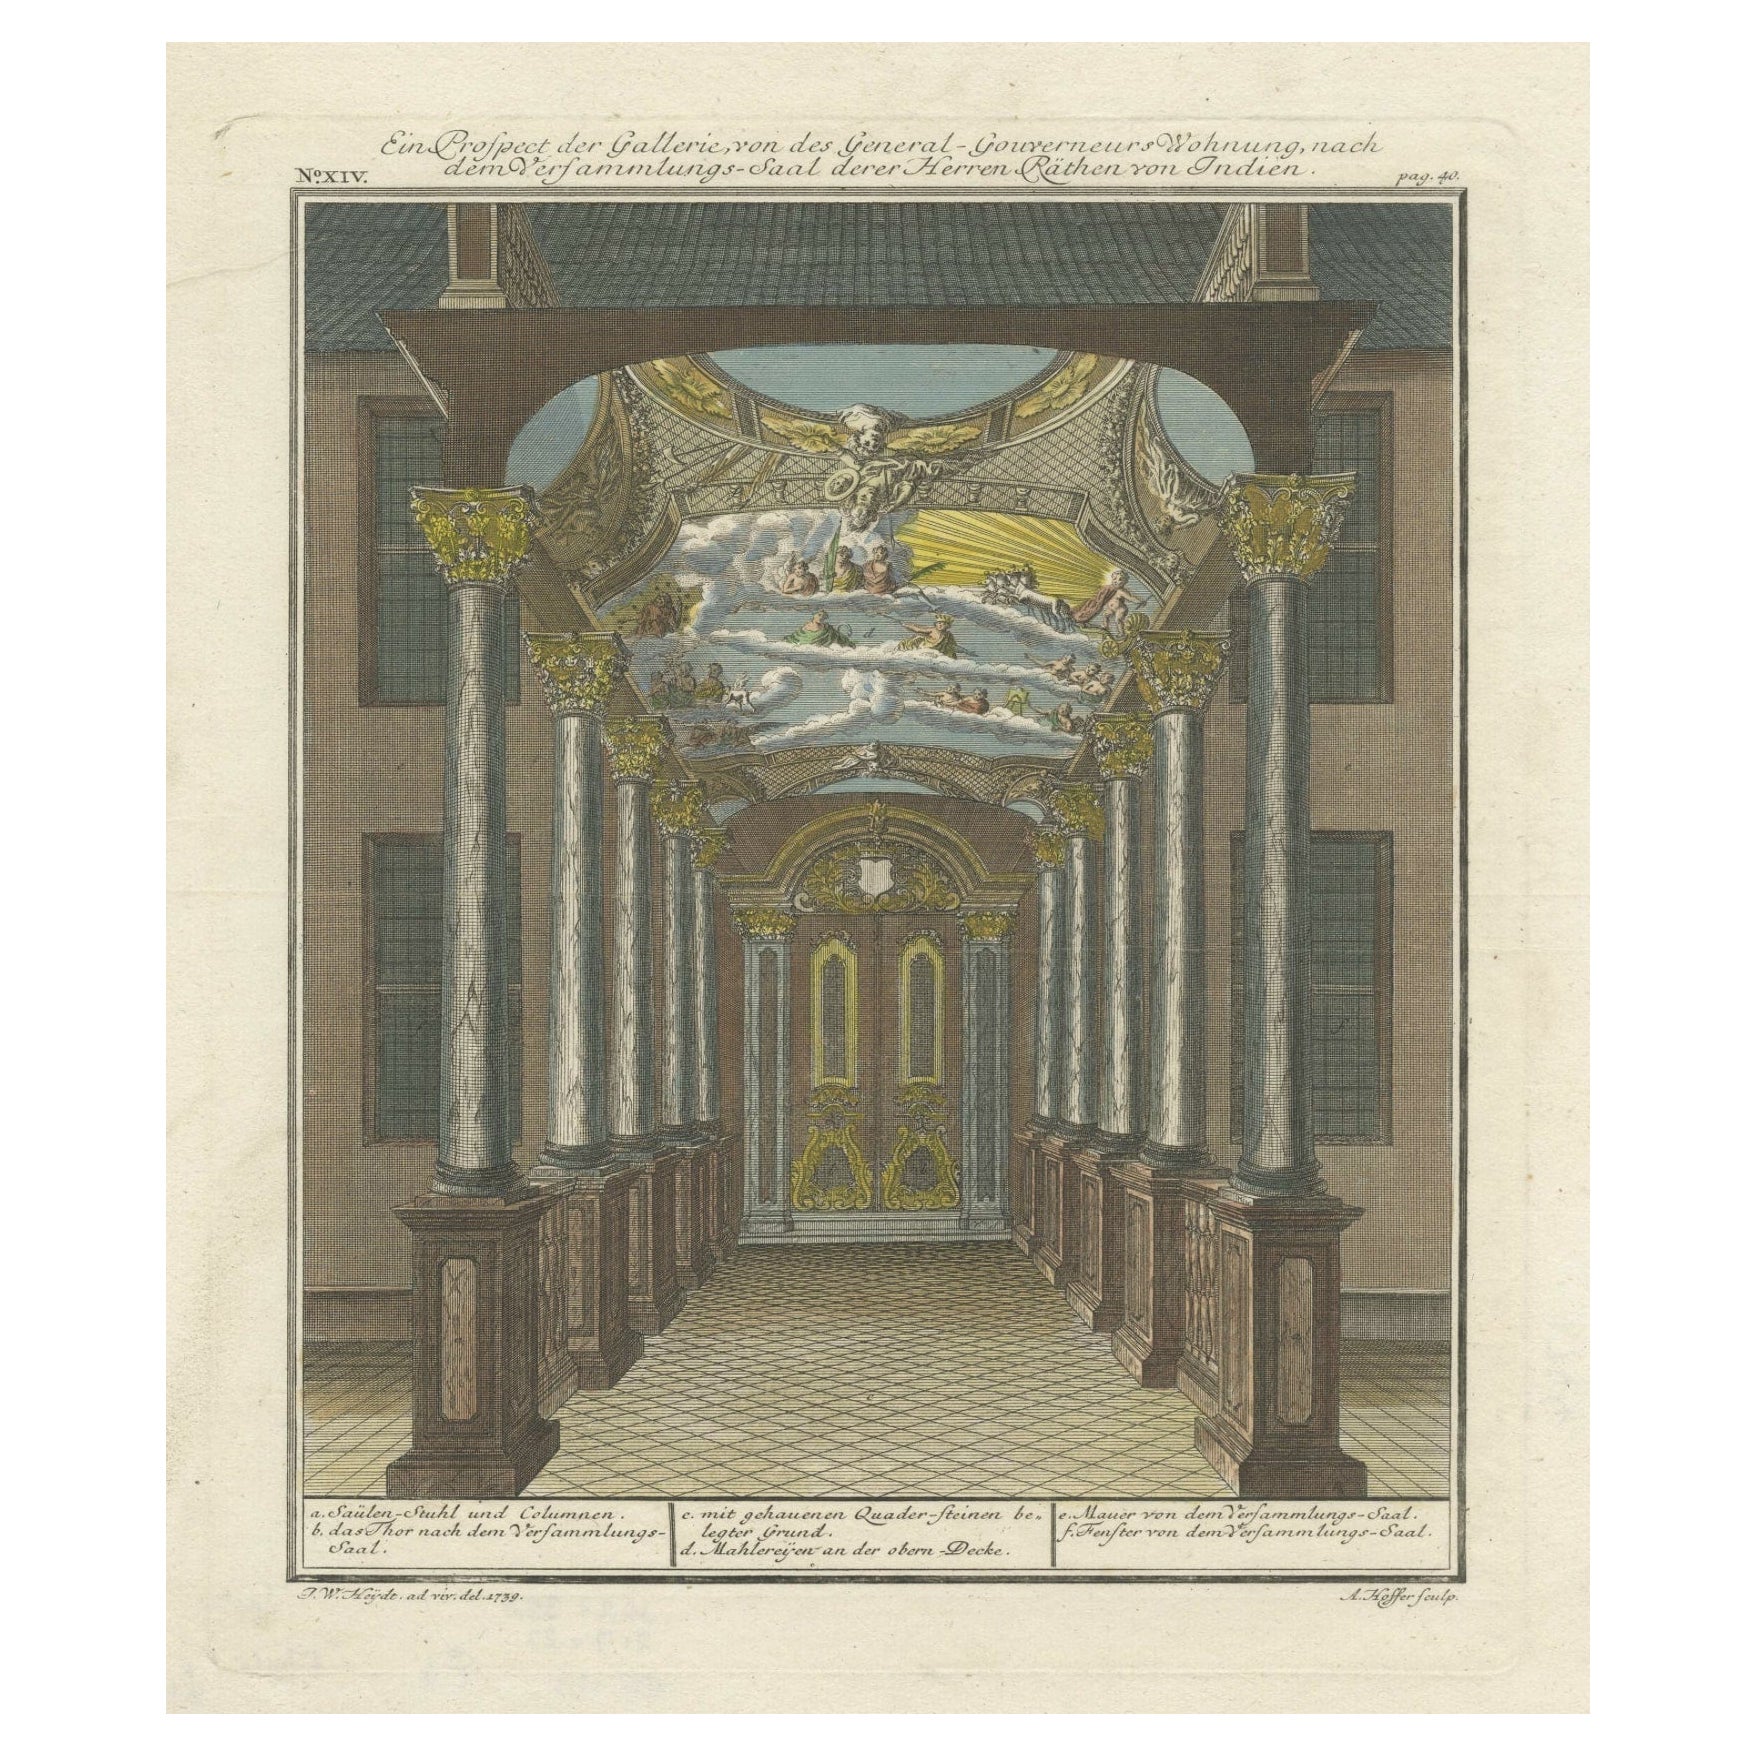 Print of the Interior of the Governor General's Home on Java (Indonesia), 1739